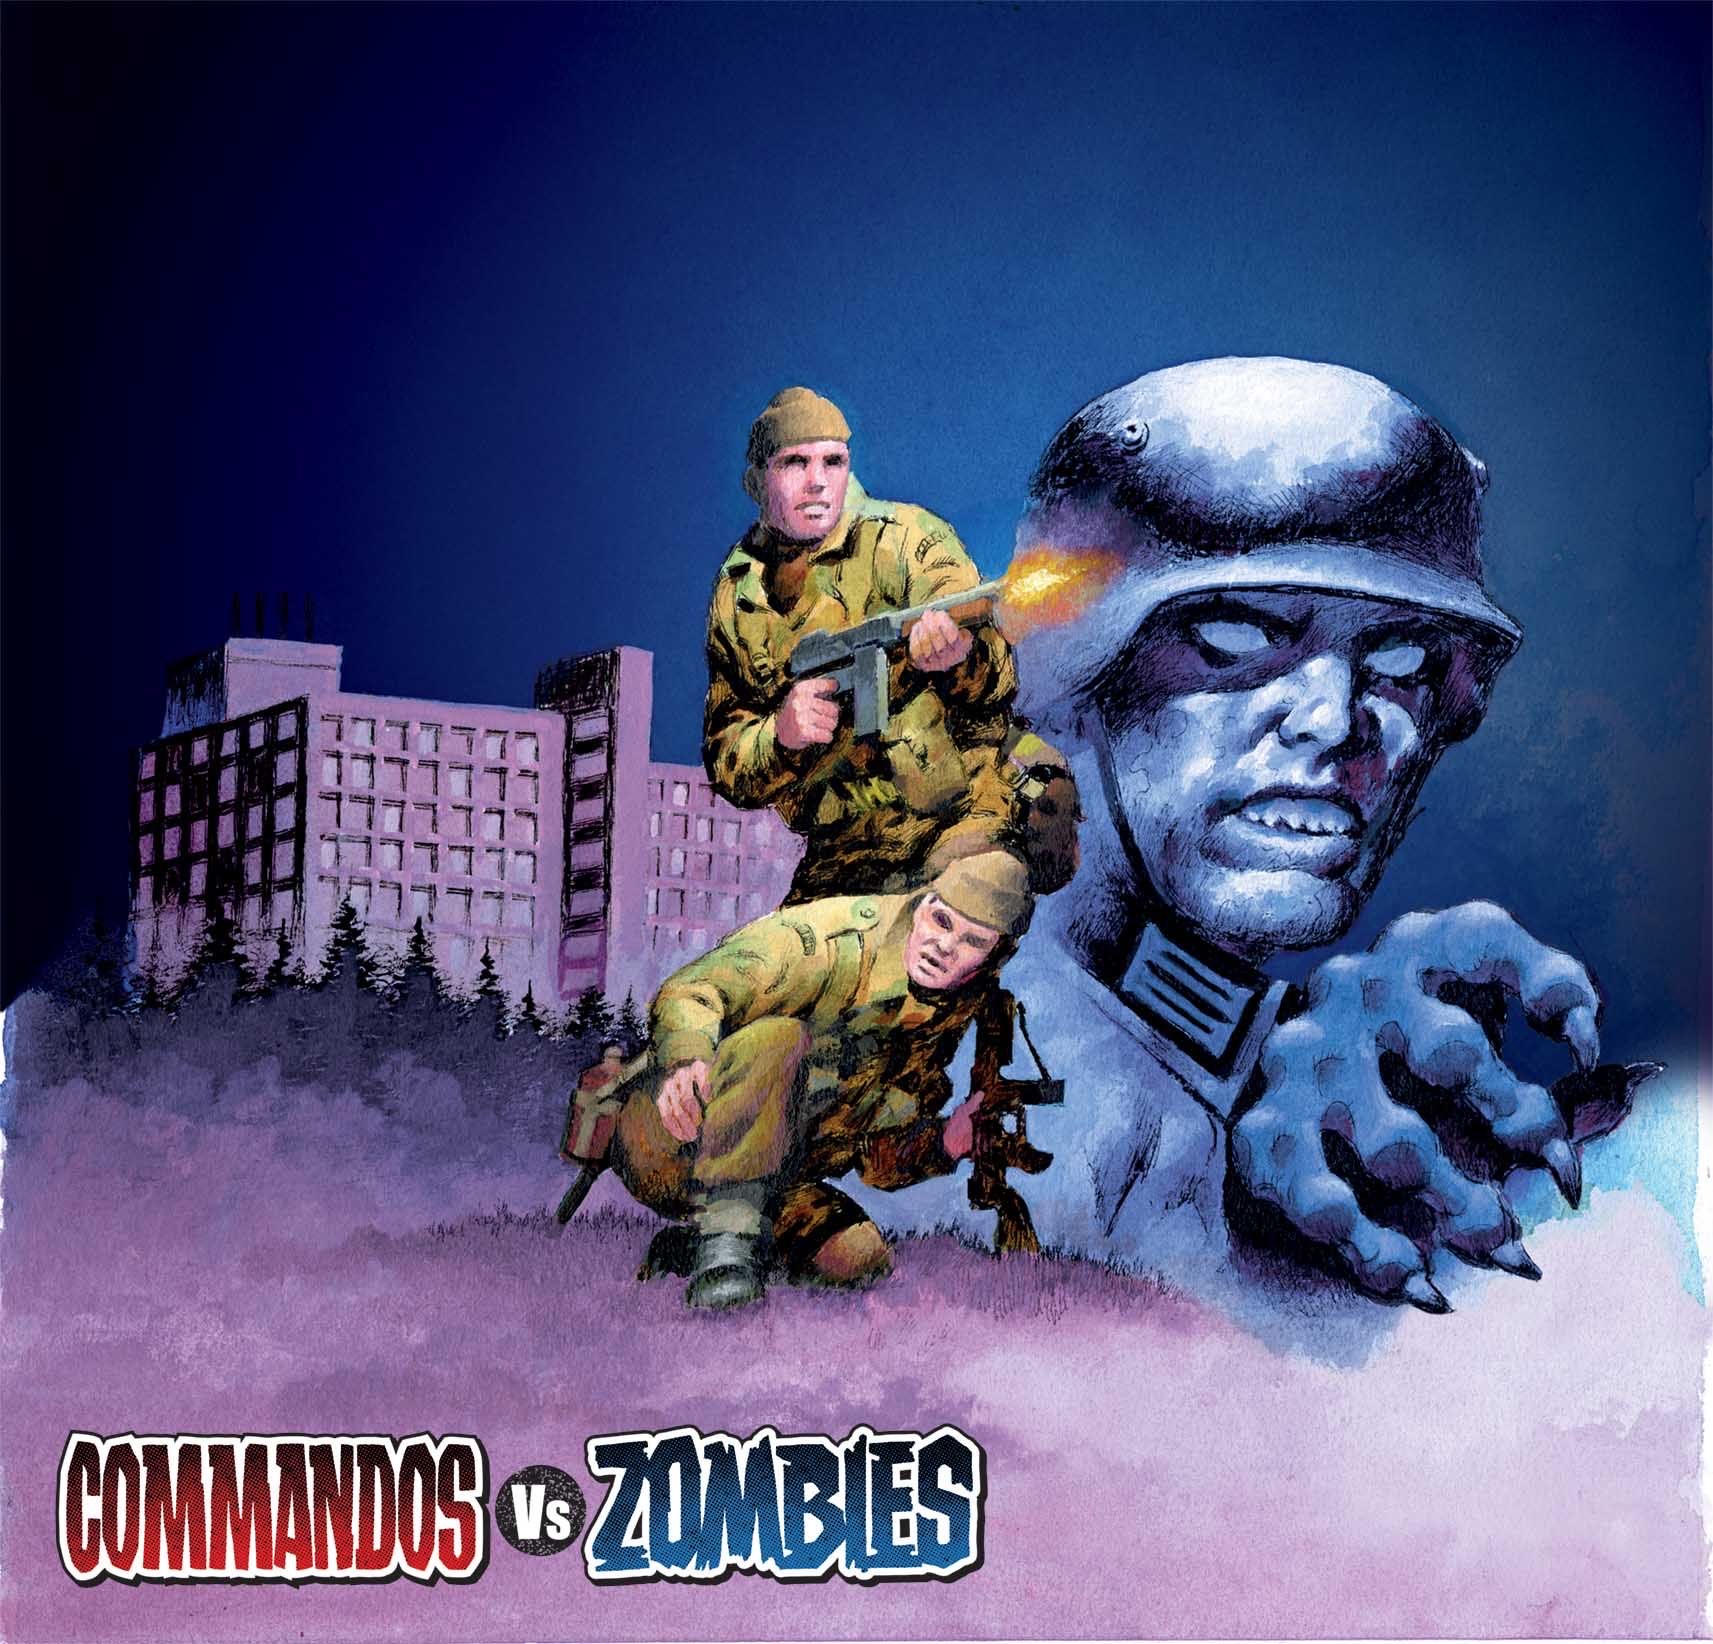 The full cover to the Commando Halloween Special! Issue 5277 Commandos Vs Zombies is out on 31st October